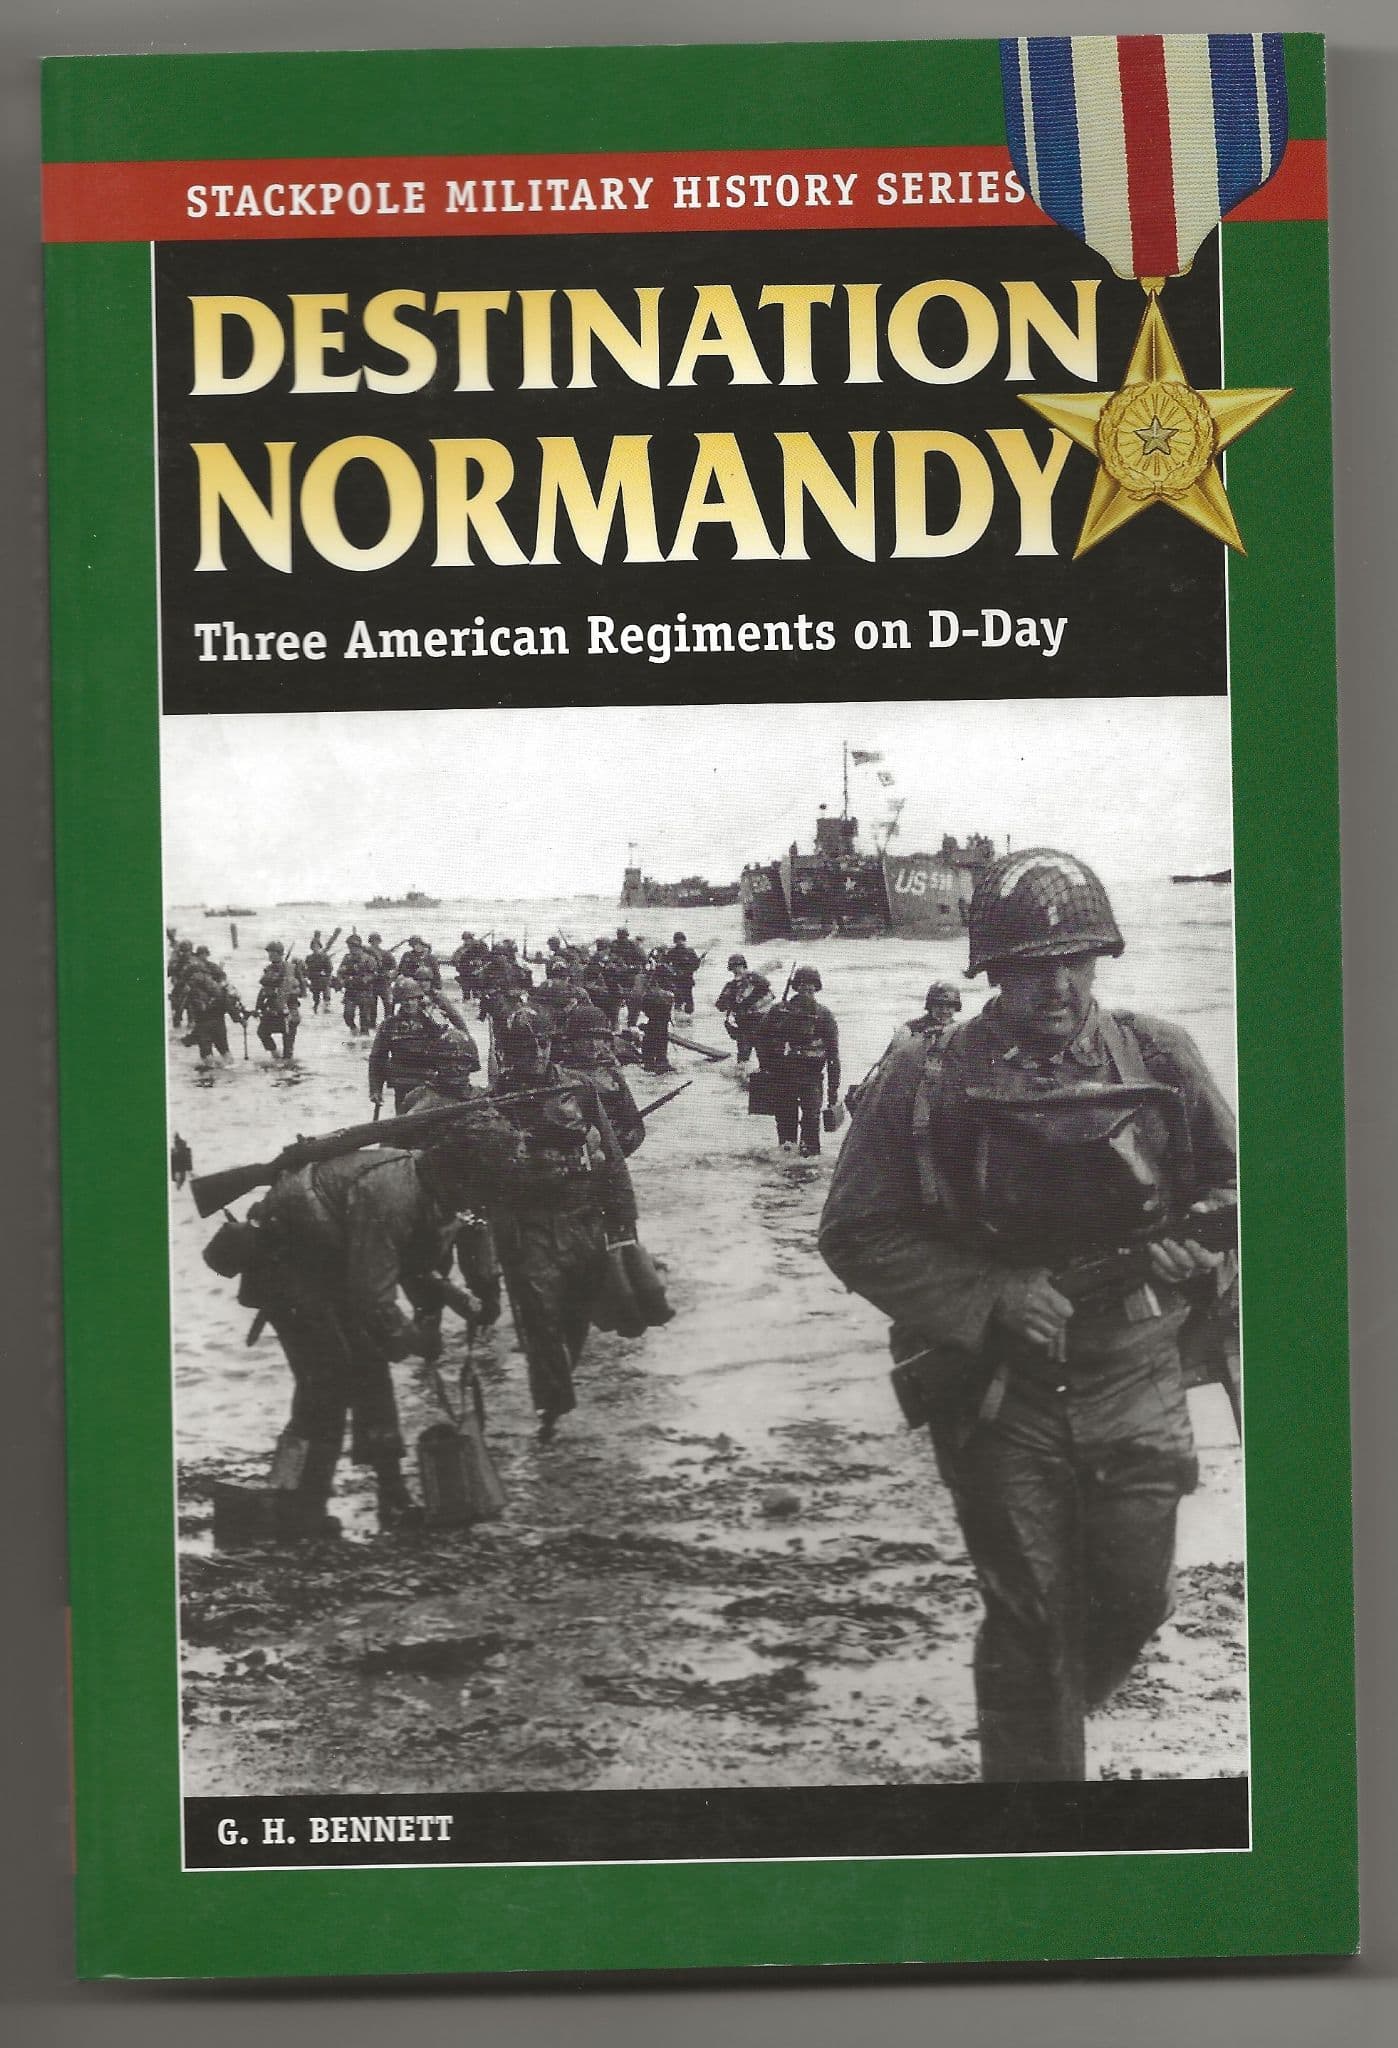 Stackpole: Destination Normandy, Three American Regiments on D-Day